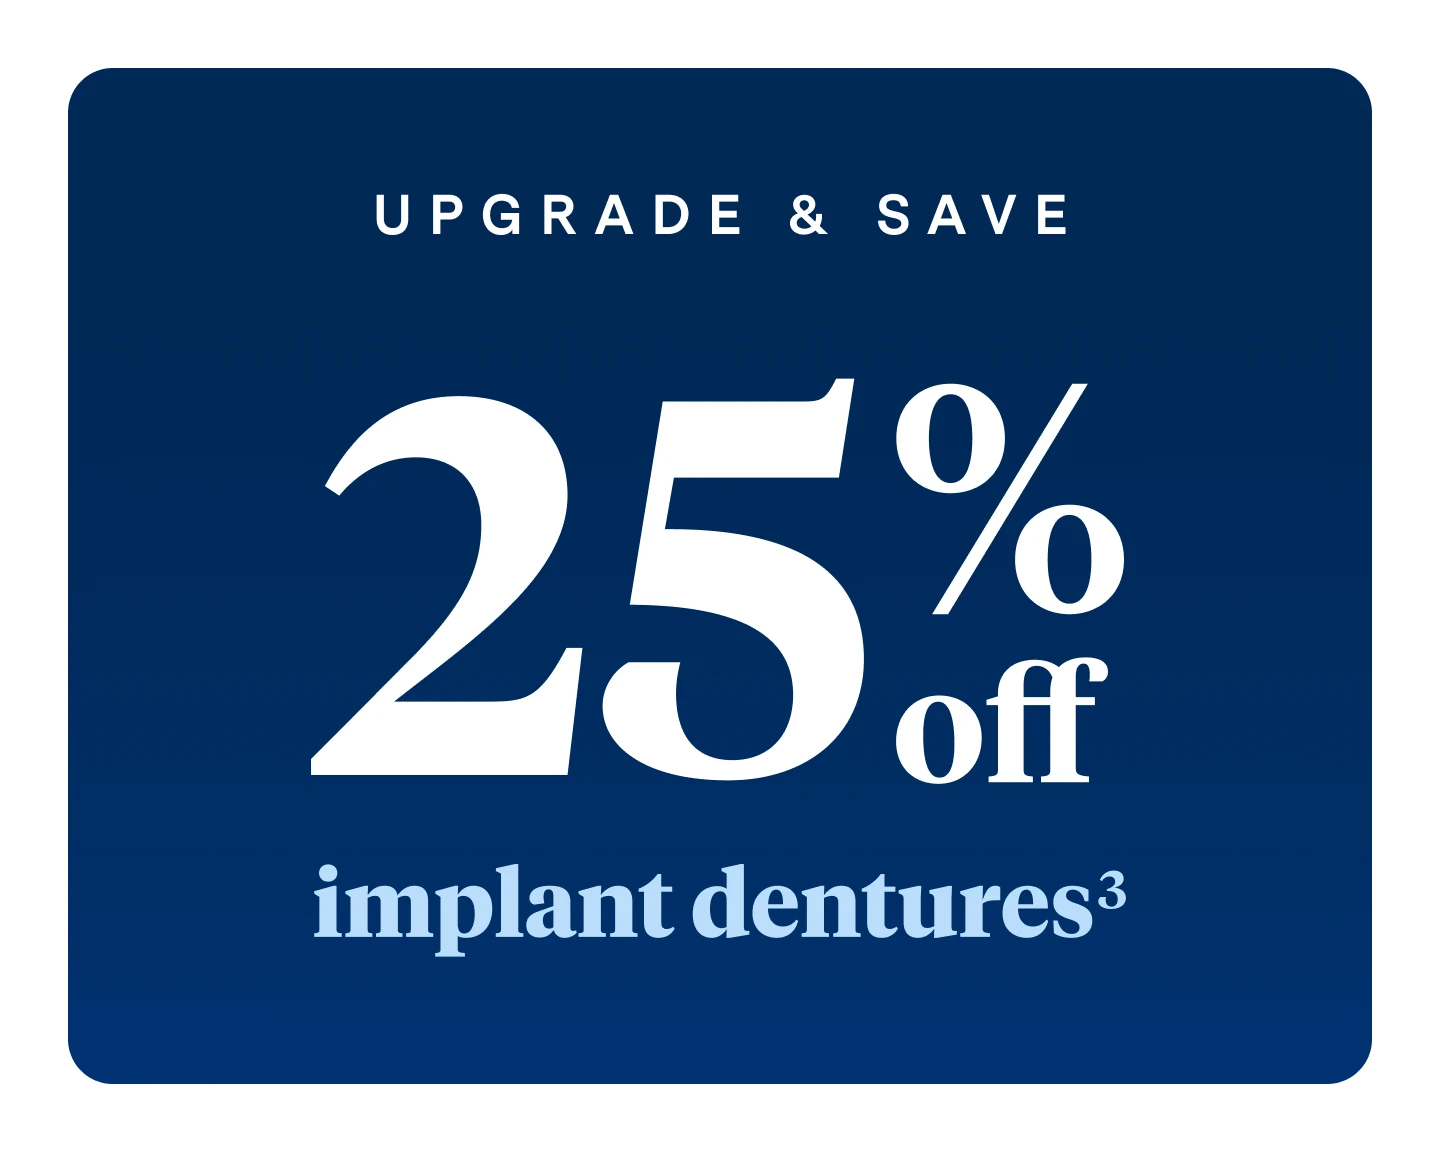 Upgrade and save. 25% off implant dentures.